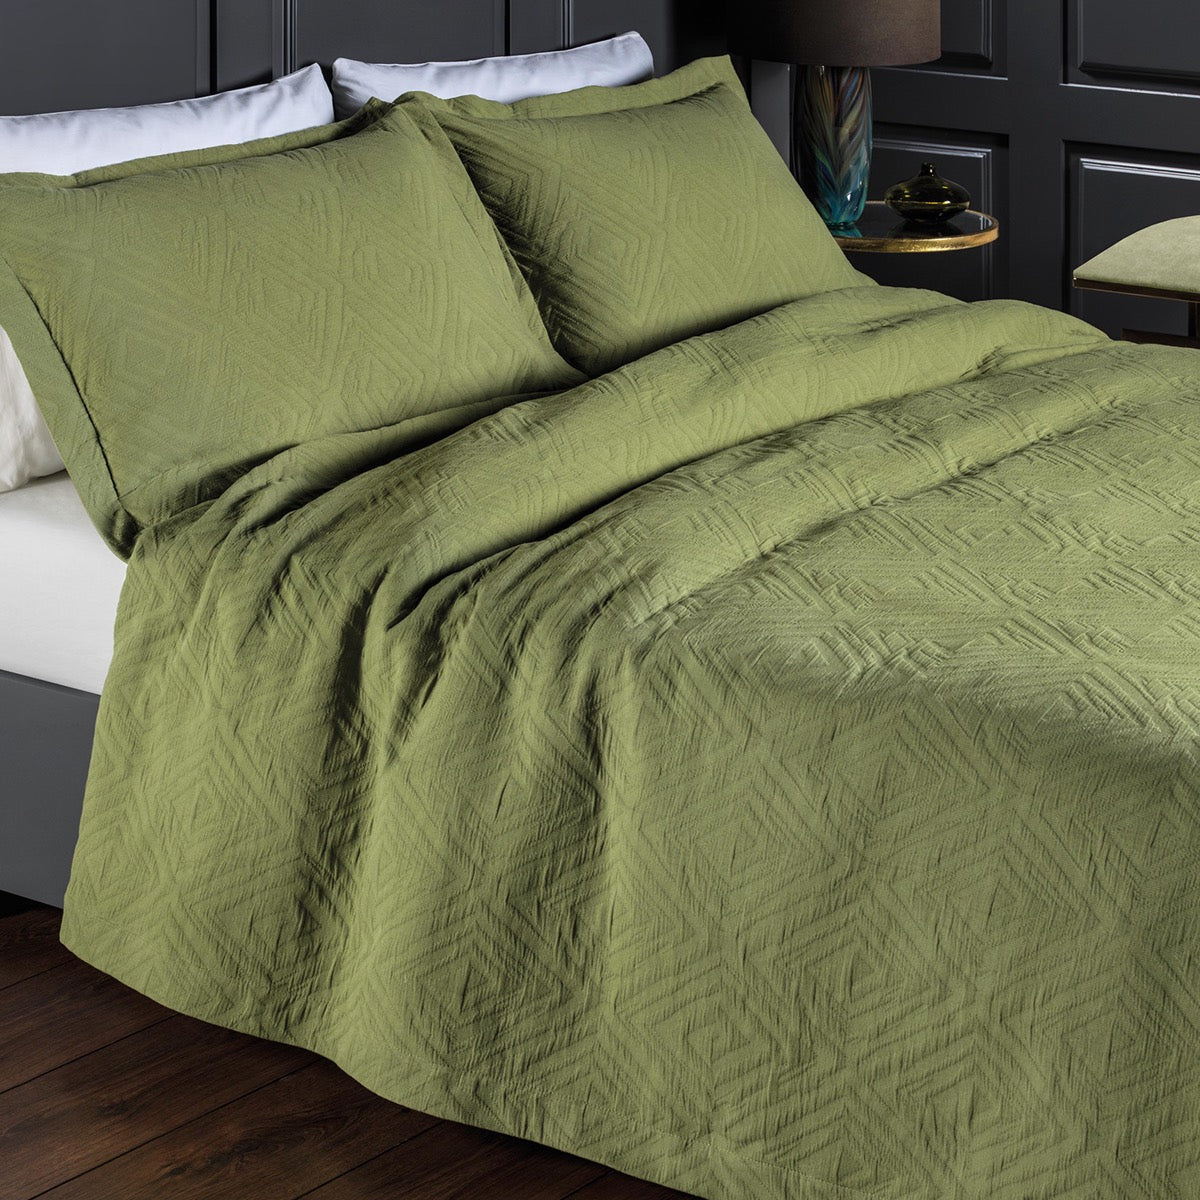 Padstow Woven Bedspread - Olive Green